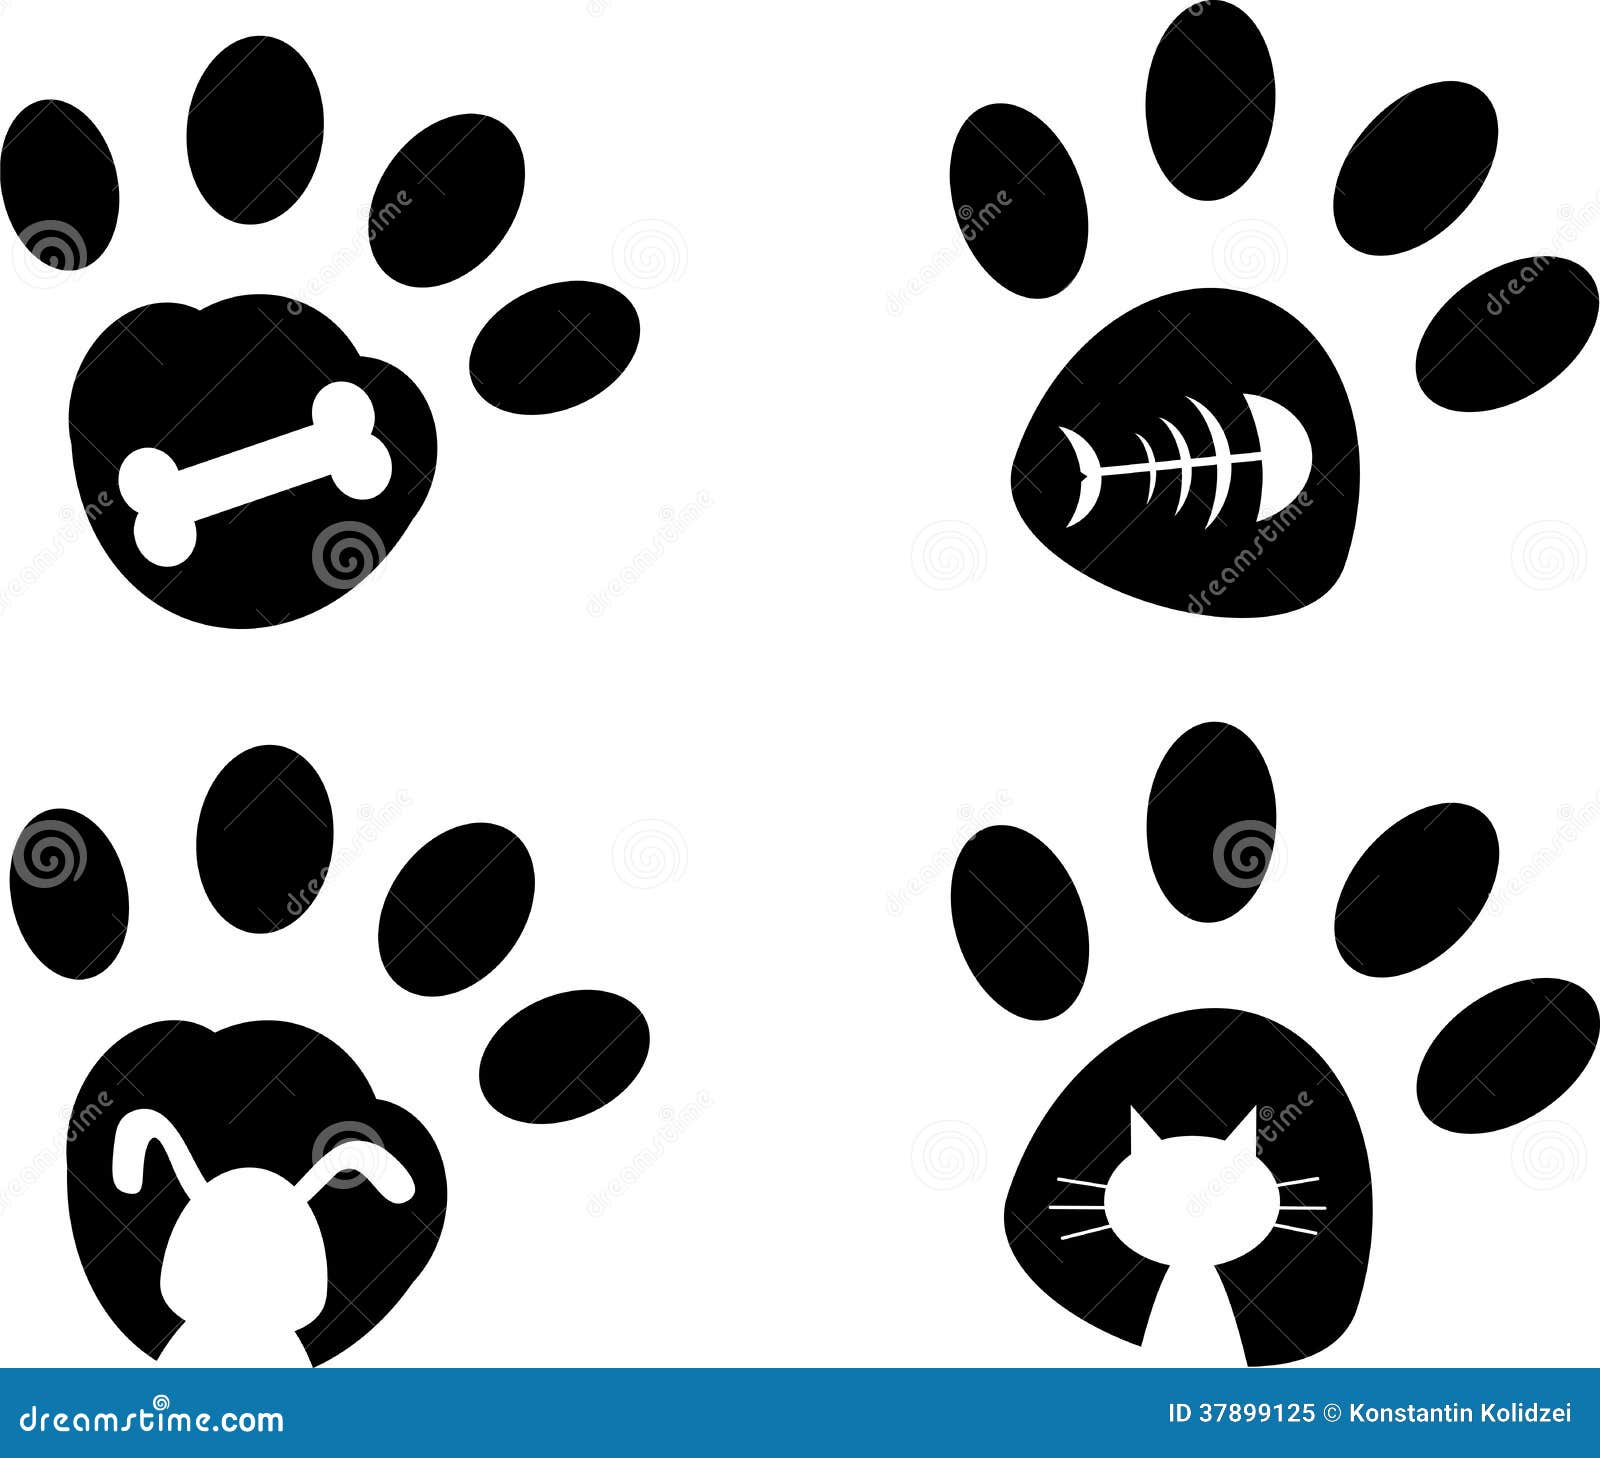 clipart- dog and cat paw prints - photo #40